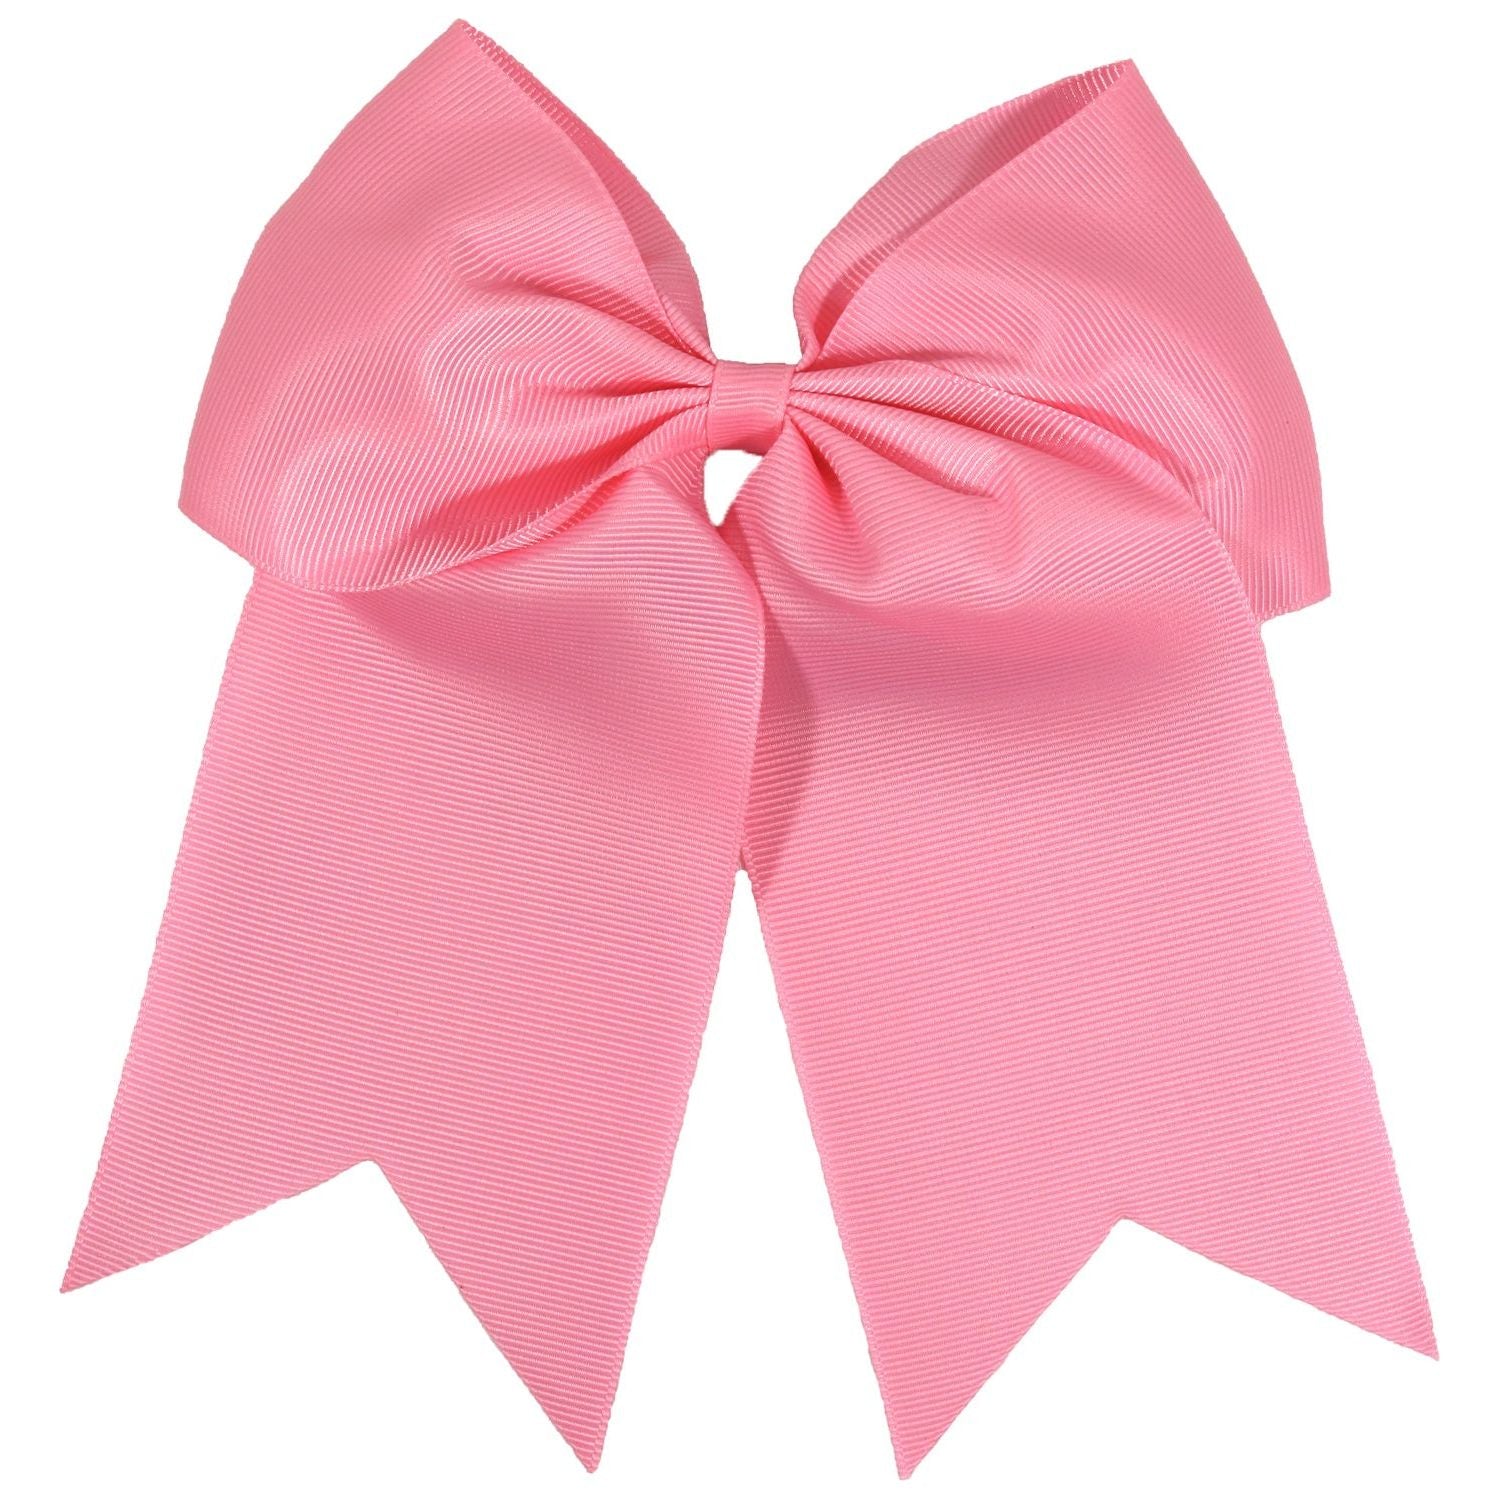 Hot Pink Glitter Cheer Bow for Girls Large Hair Bows with Ponytail Holder Ribbon | Kenz Laurenz